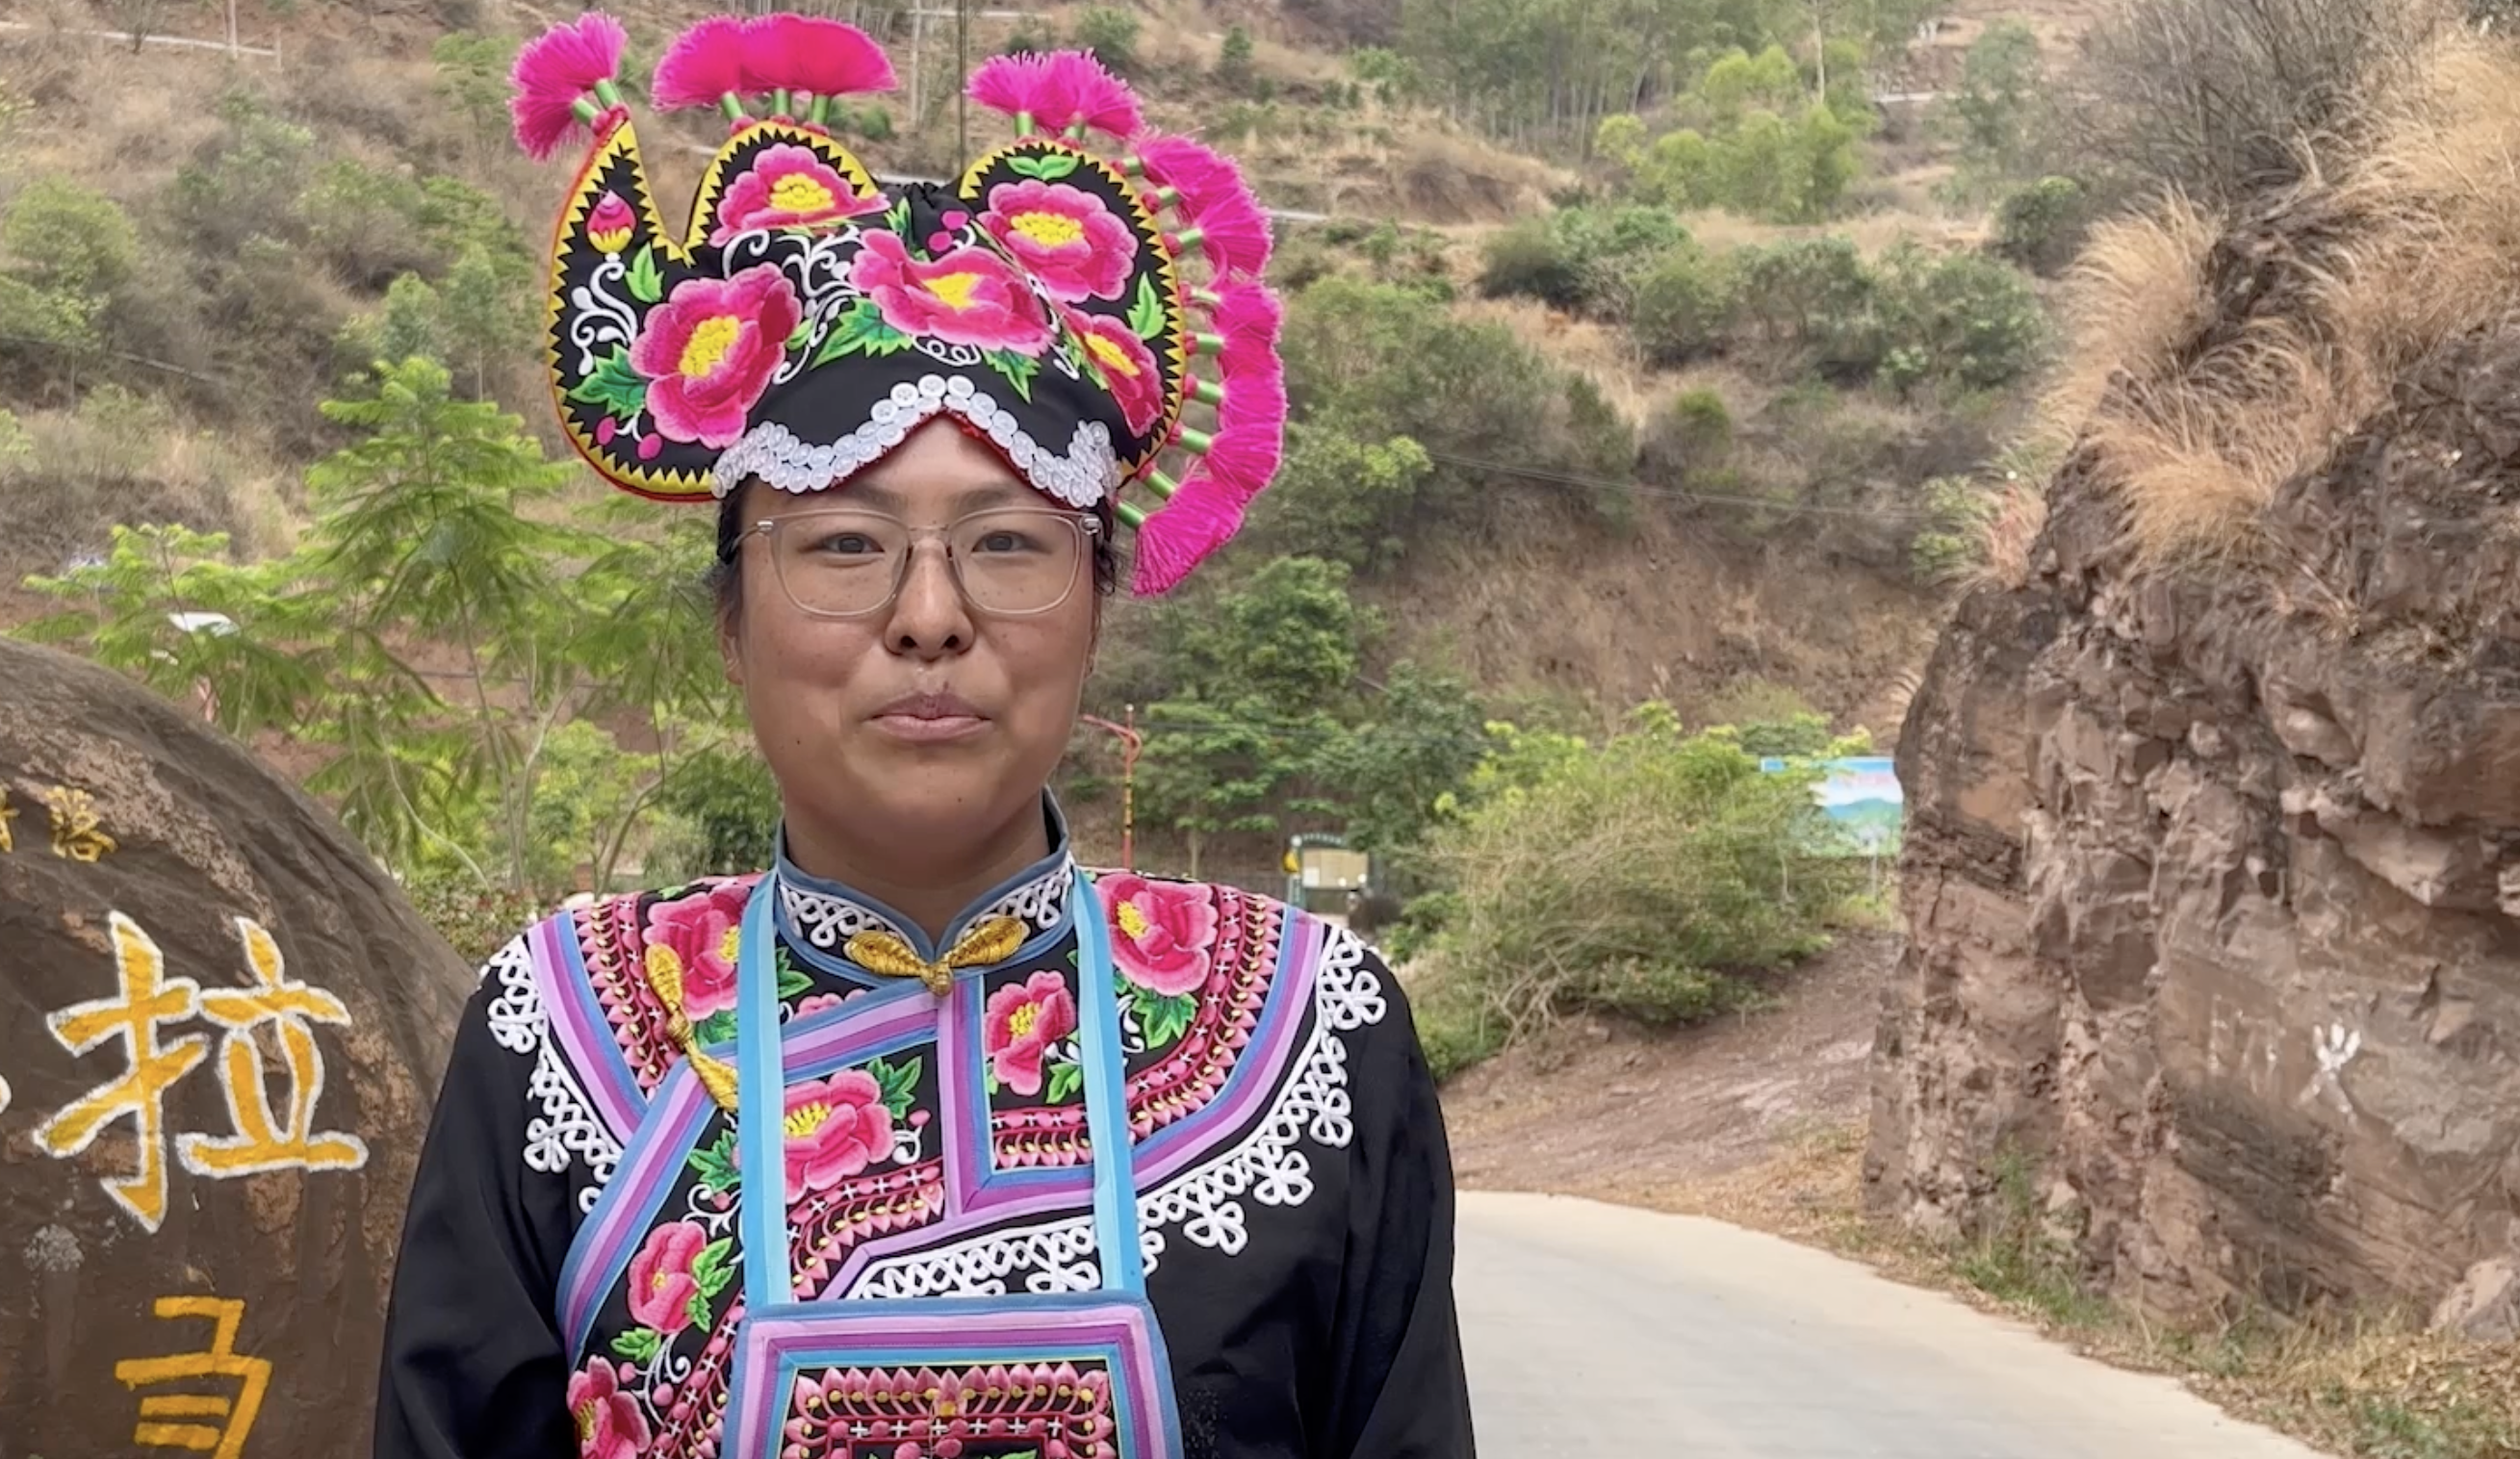 A chinese woman in a colorful outfit stands on a road by a boulder with Chinese writing on it.